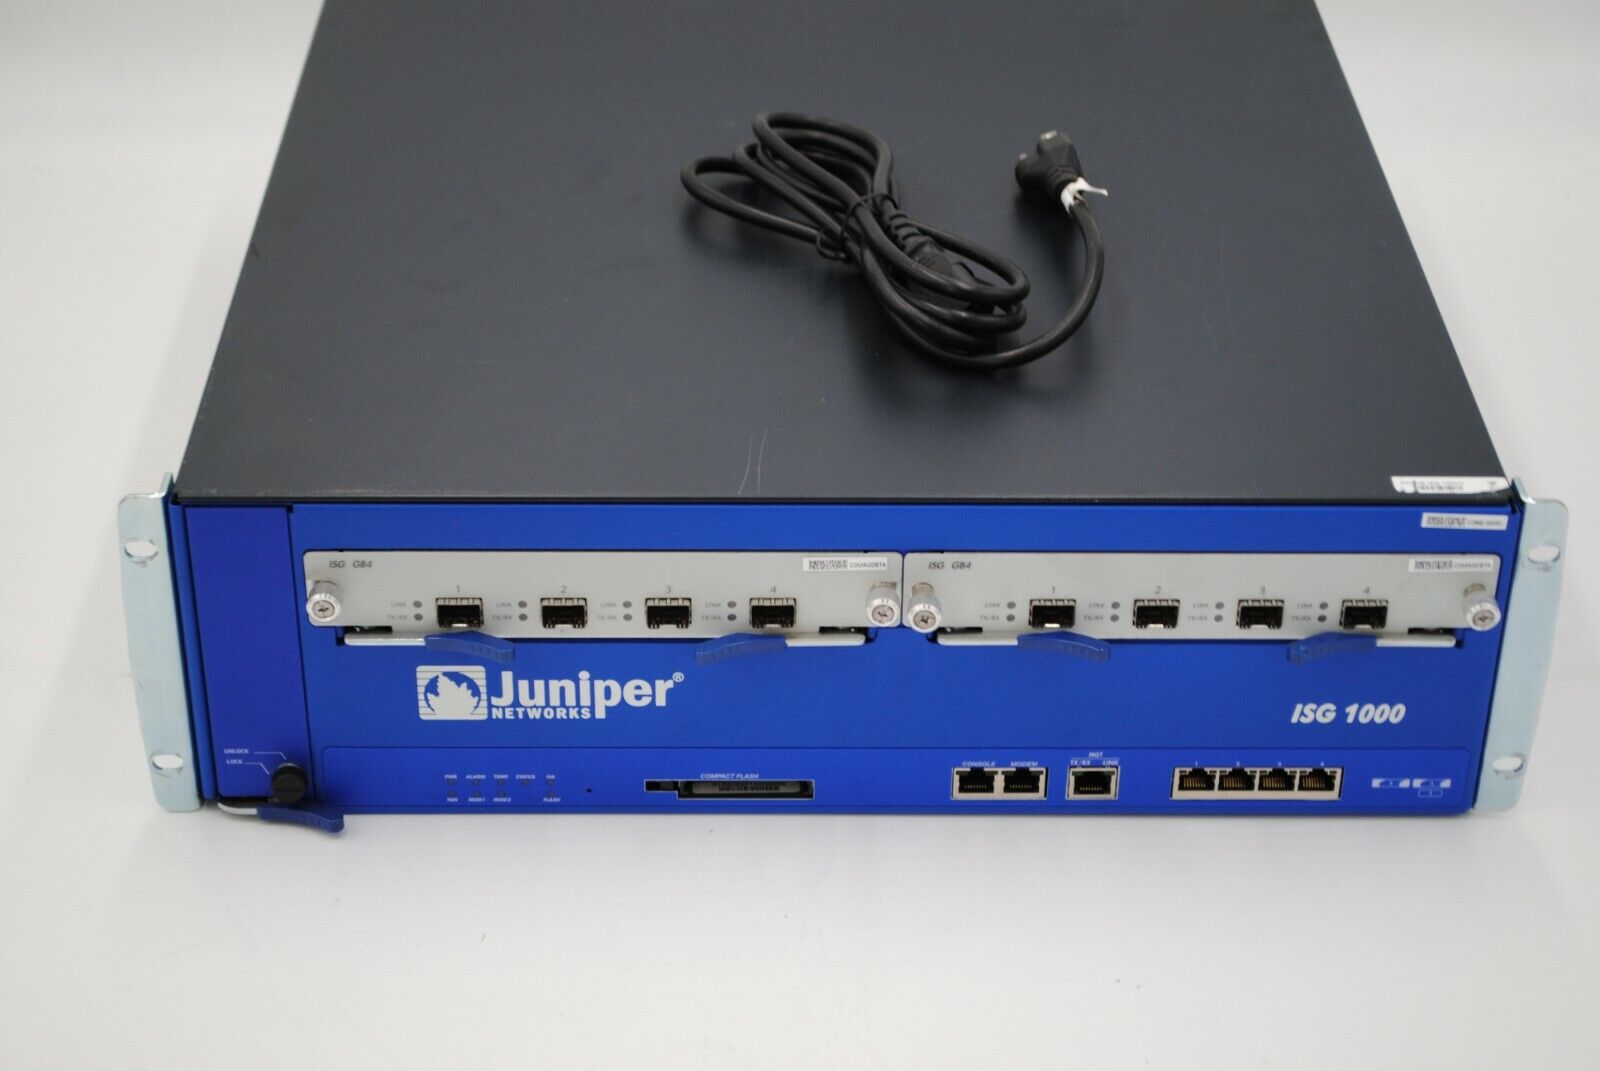 Juniper Networks NS-ISG-1000 Baseline Security Appliance with ISG GB4 modules